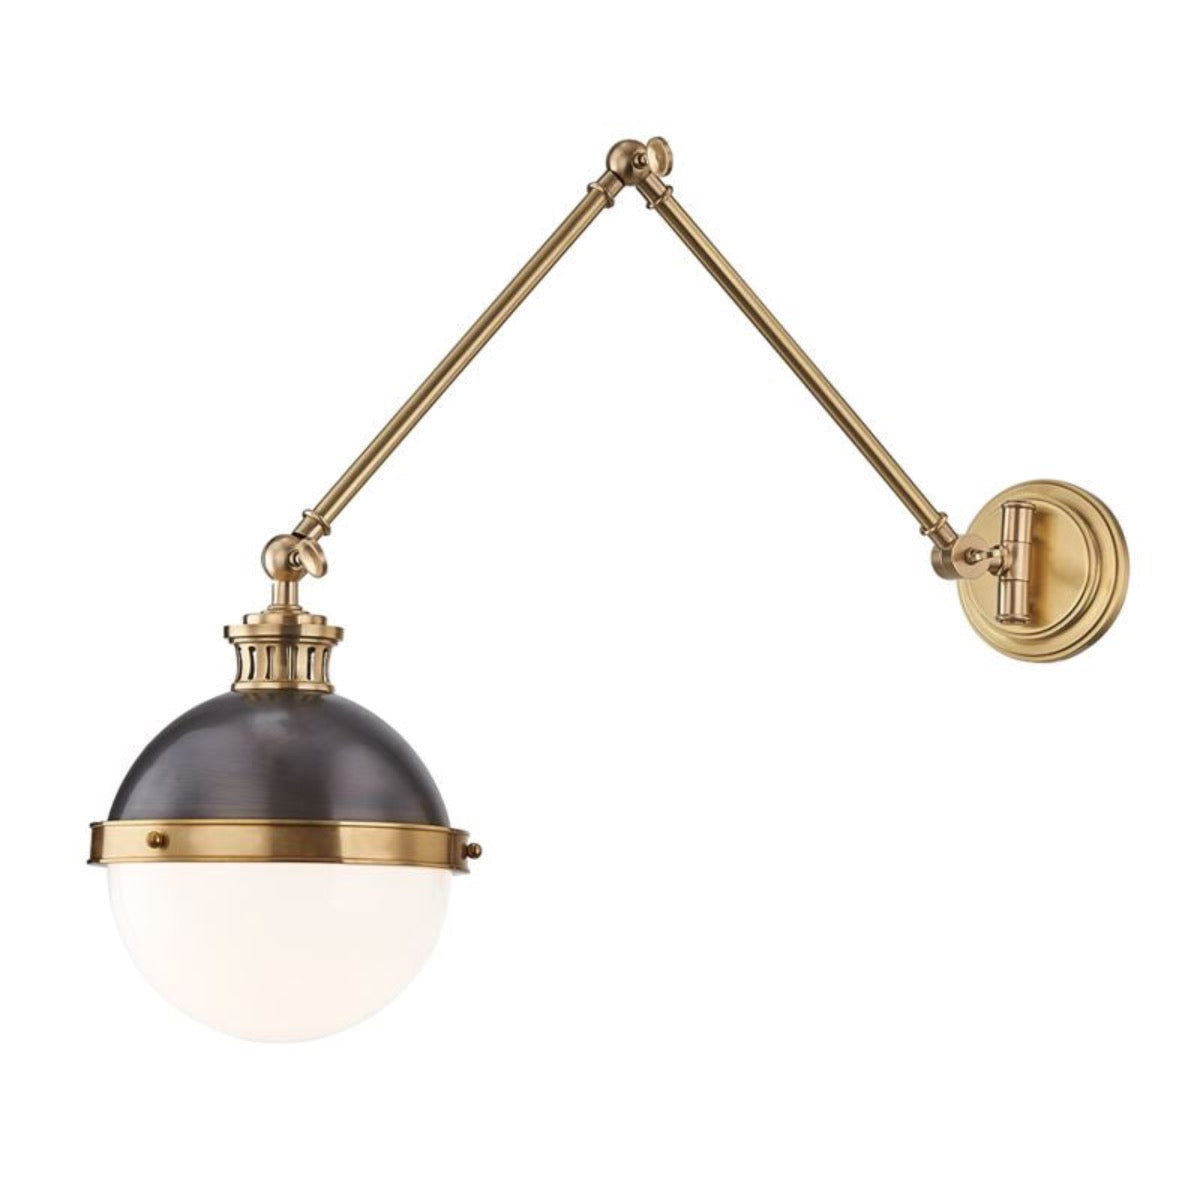 Edmond Wall Sconce Aged Brass/Antique Bronze. Left angle view. 